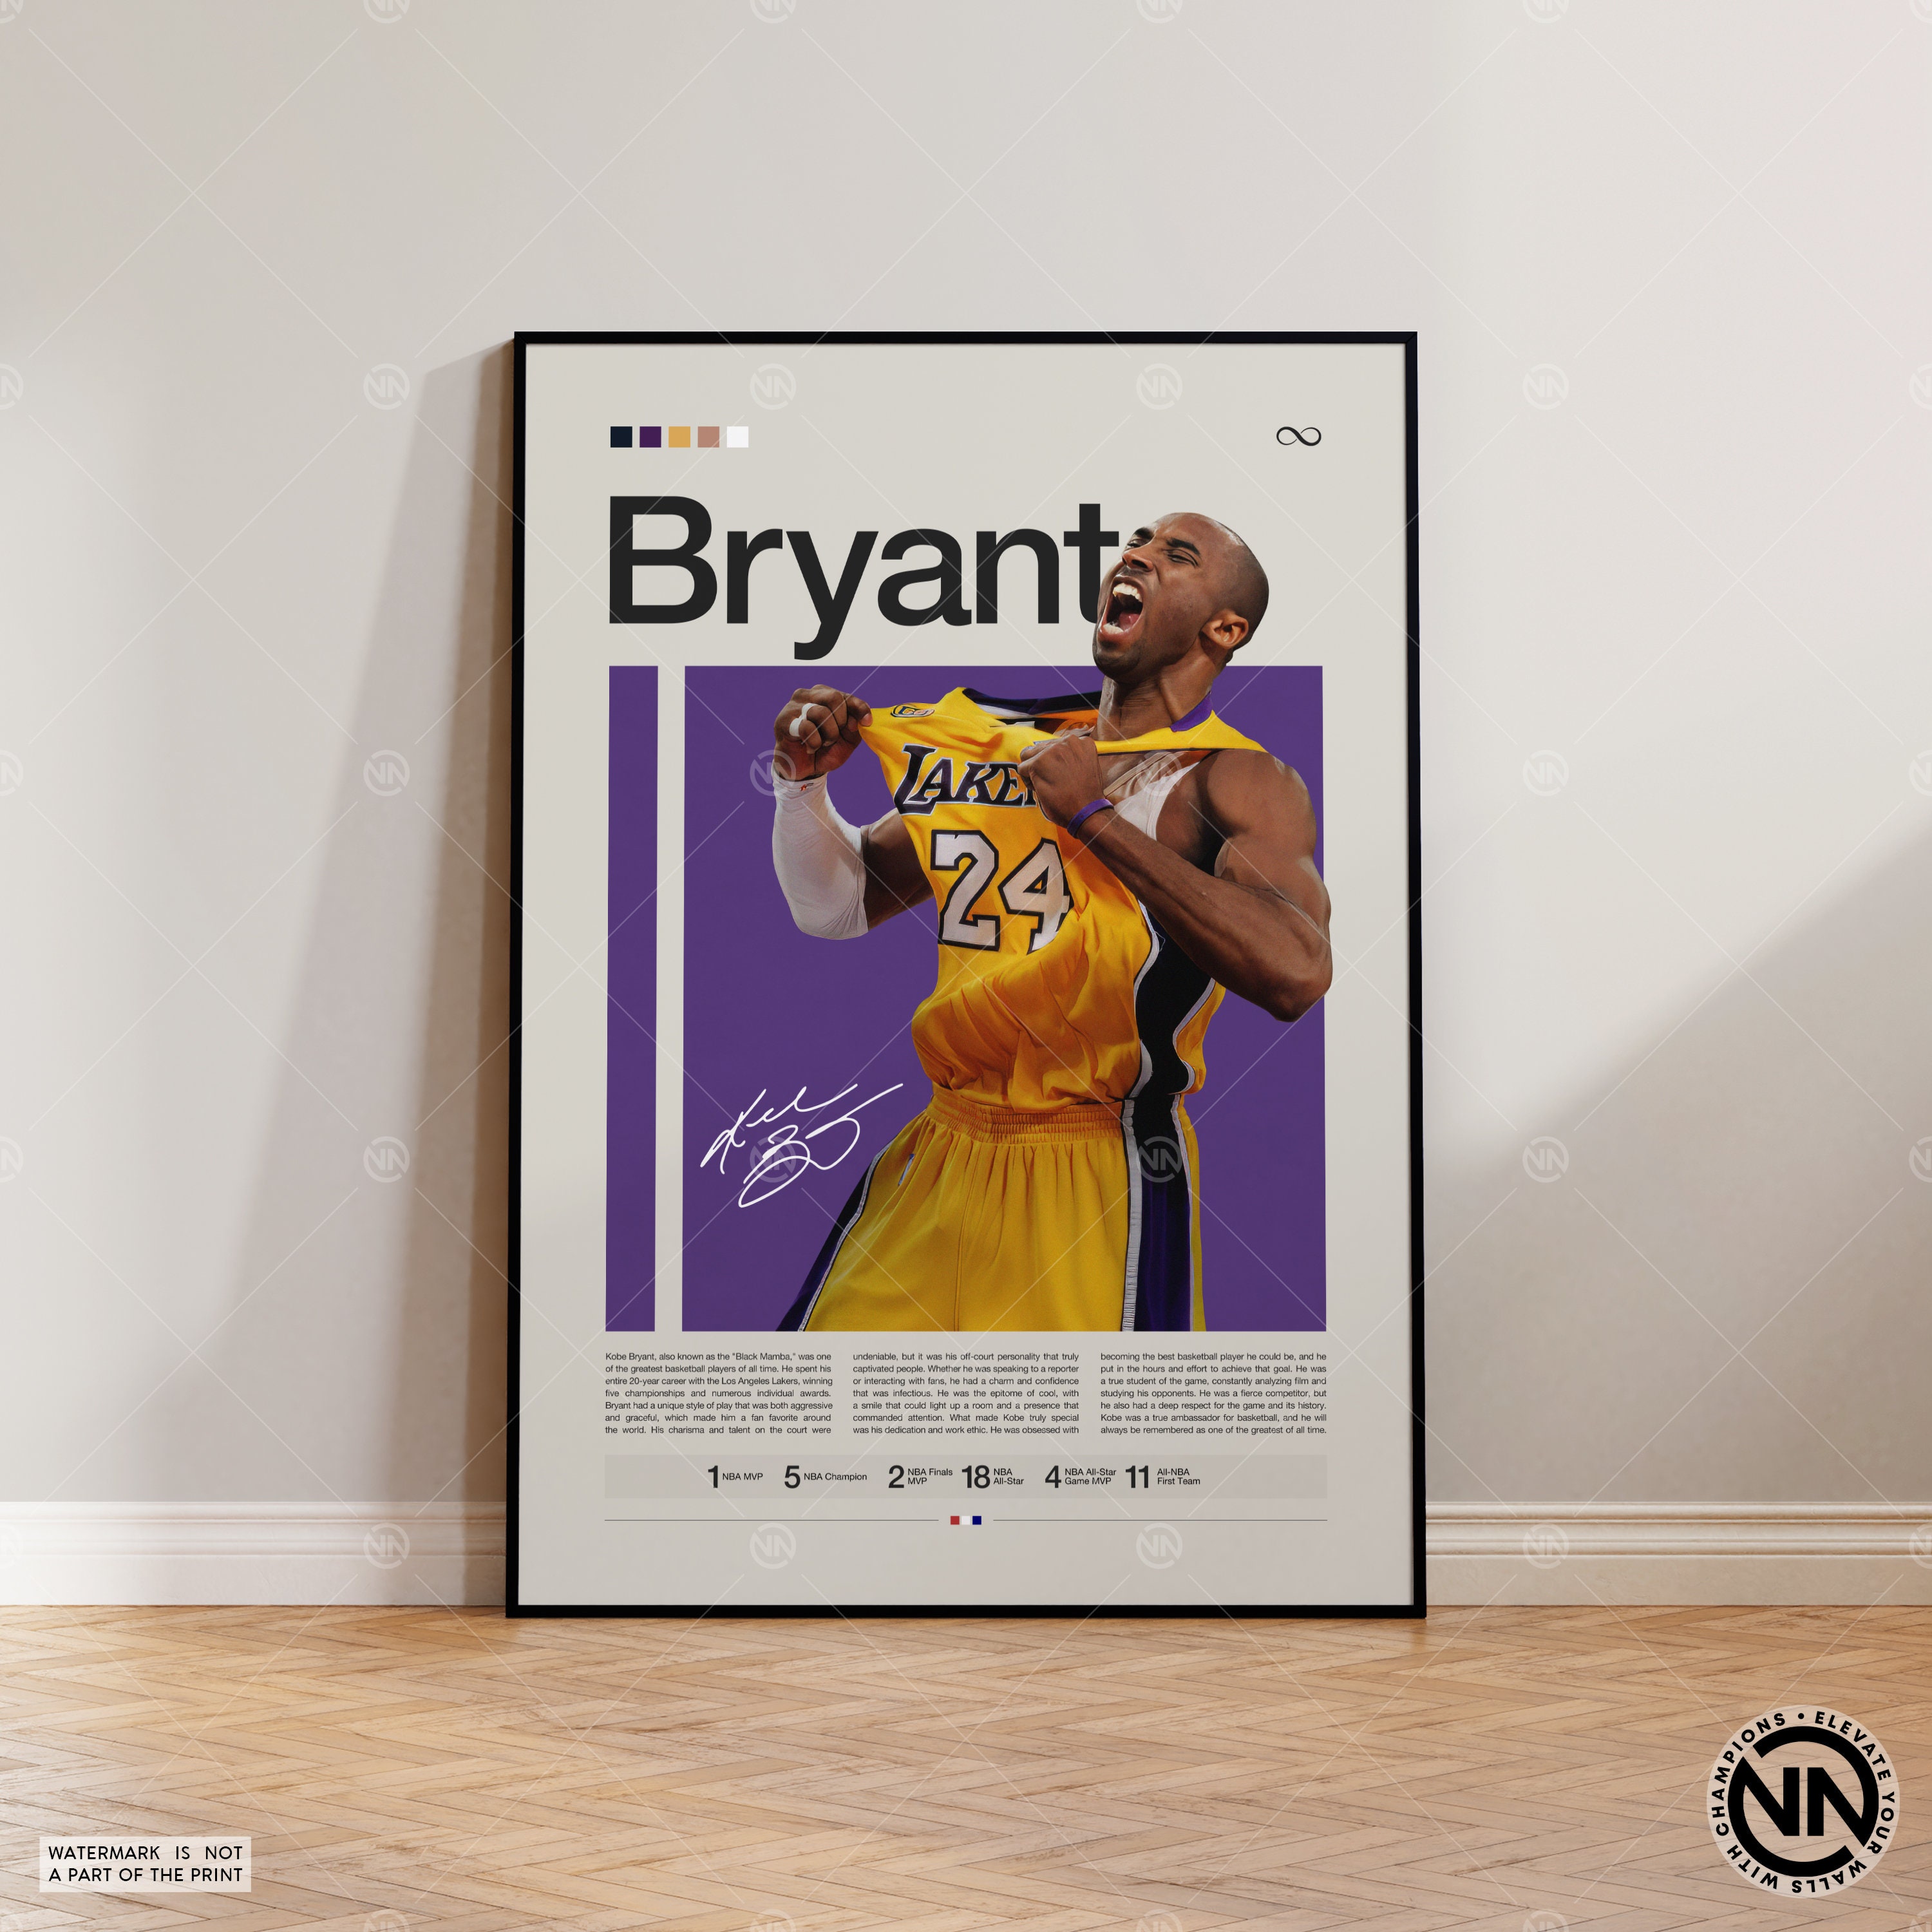 Mamba Mentality' Photos and Film Feature 10 Rare Kobe Bryant Shoes